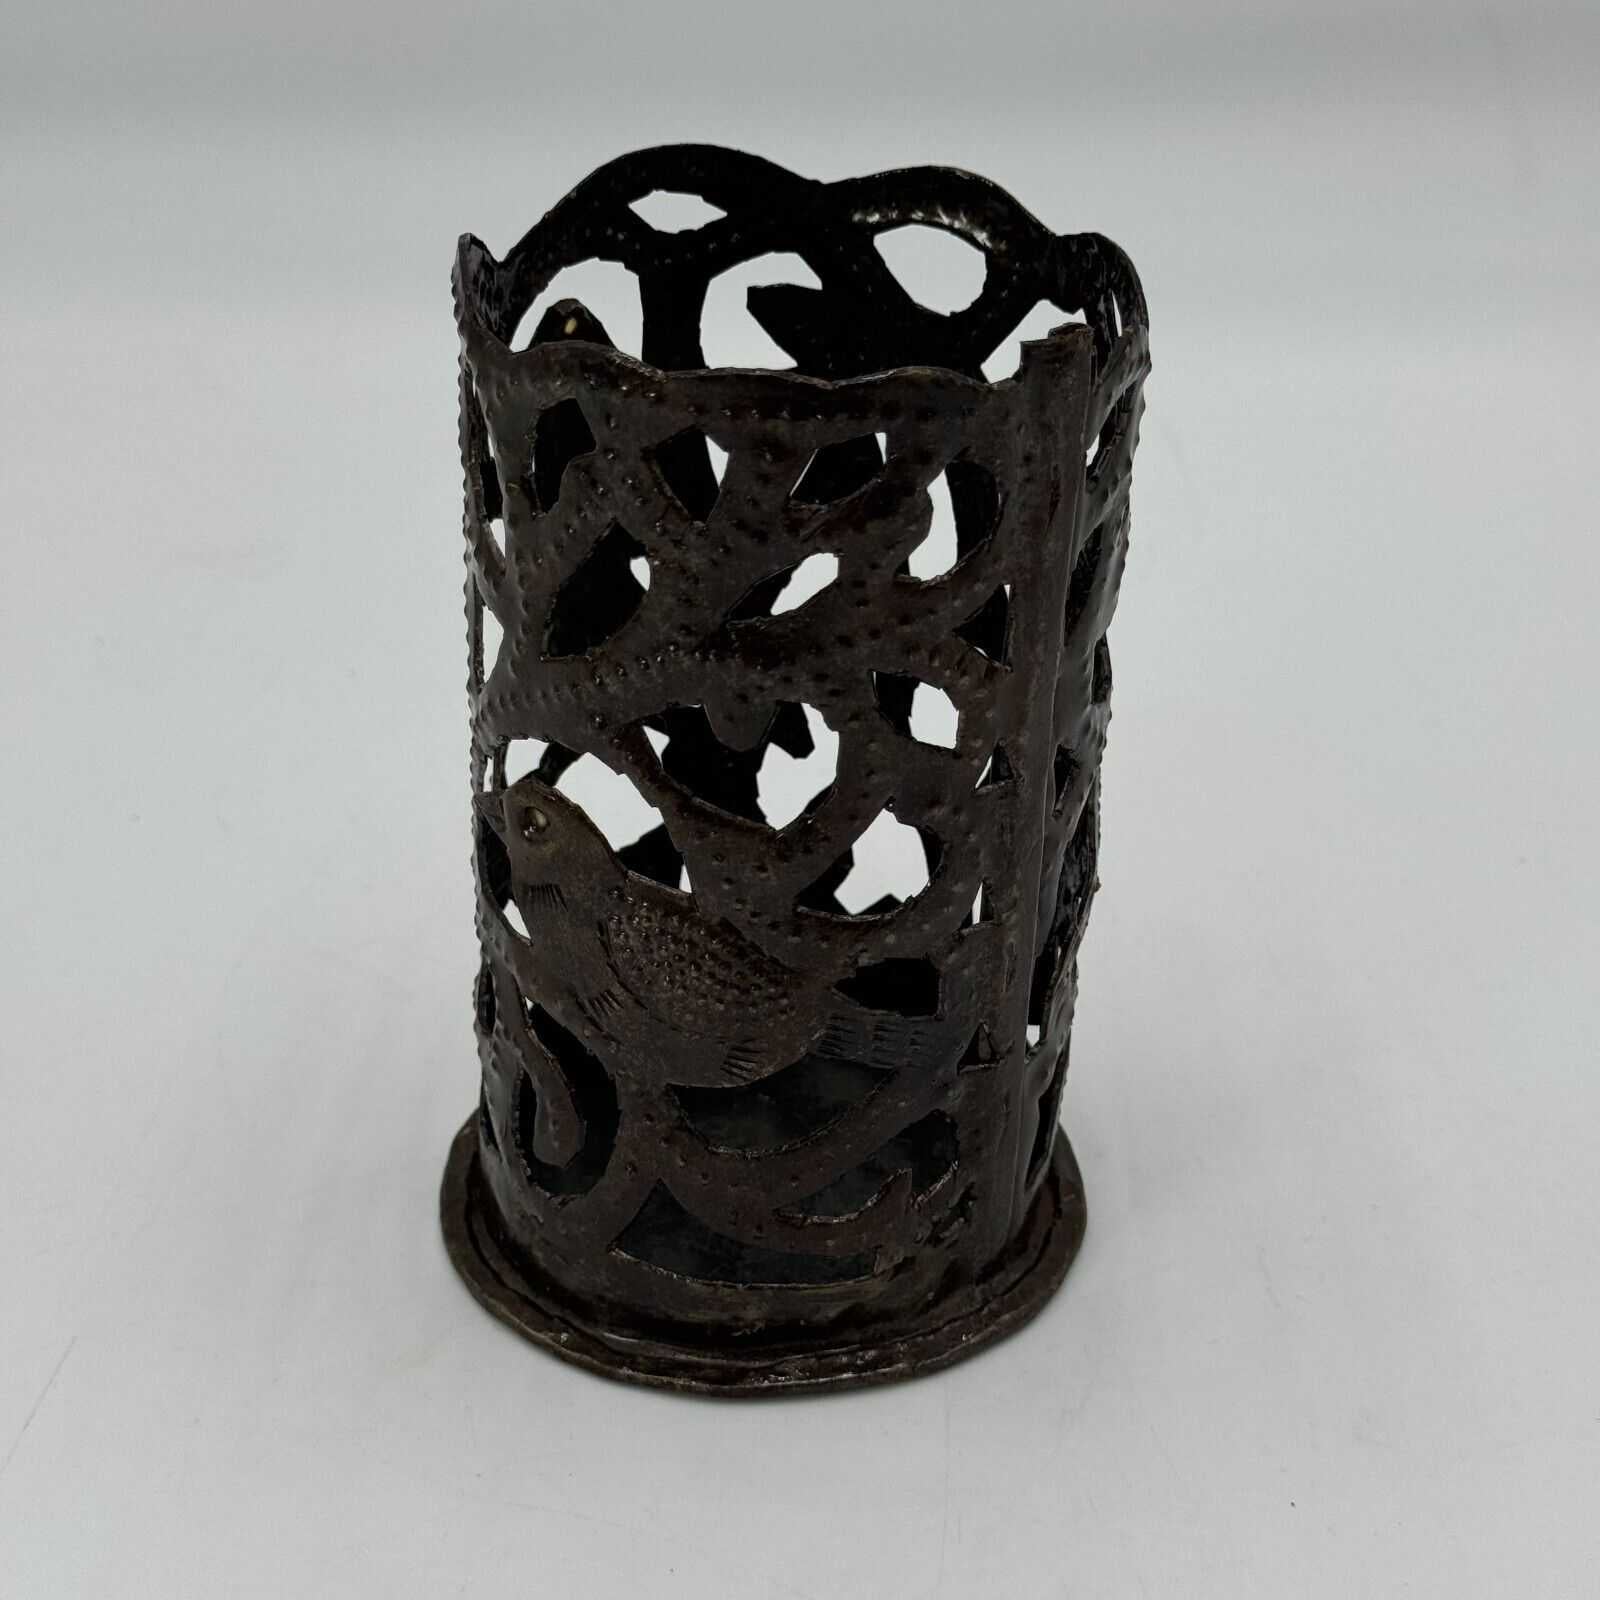 Haitian Punched Metal Bronze Candle Holder 3in Diameter L’Rernier Engraved Art